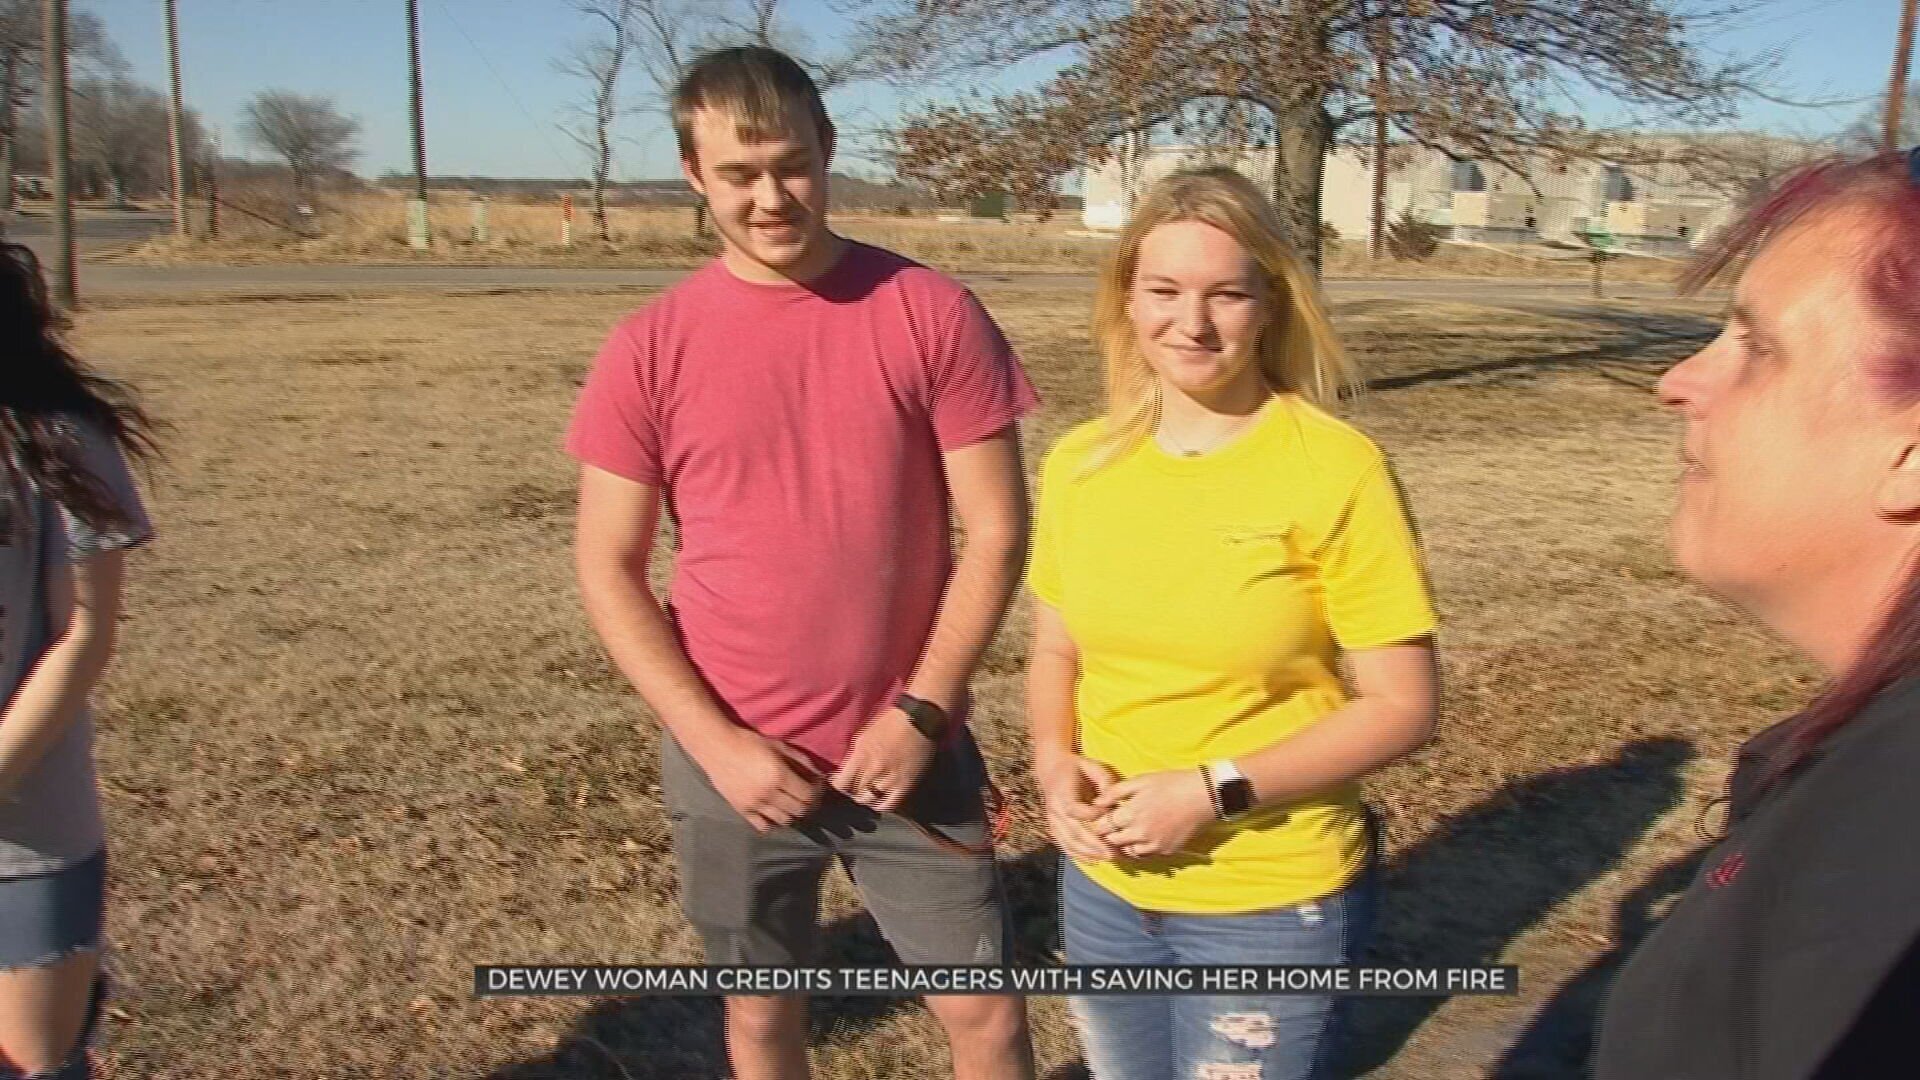 Dewey Woman Thanks 4 Teenagers For Saving Her Home From Fire 